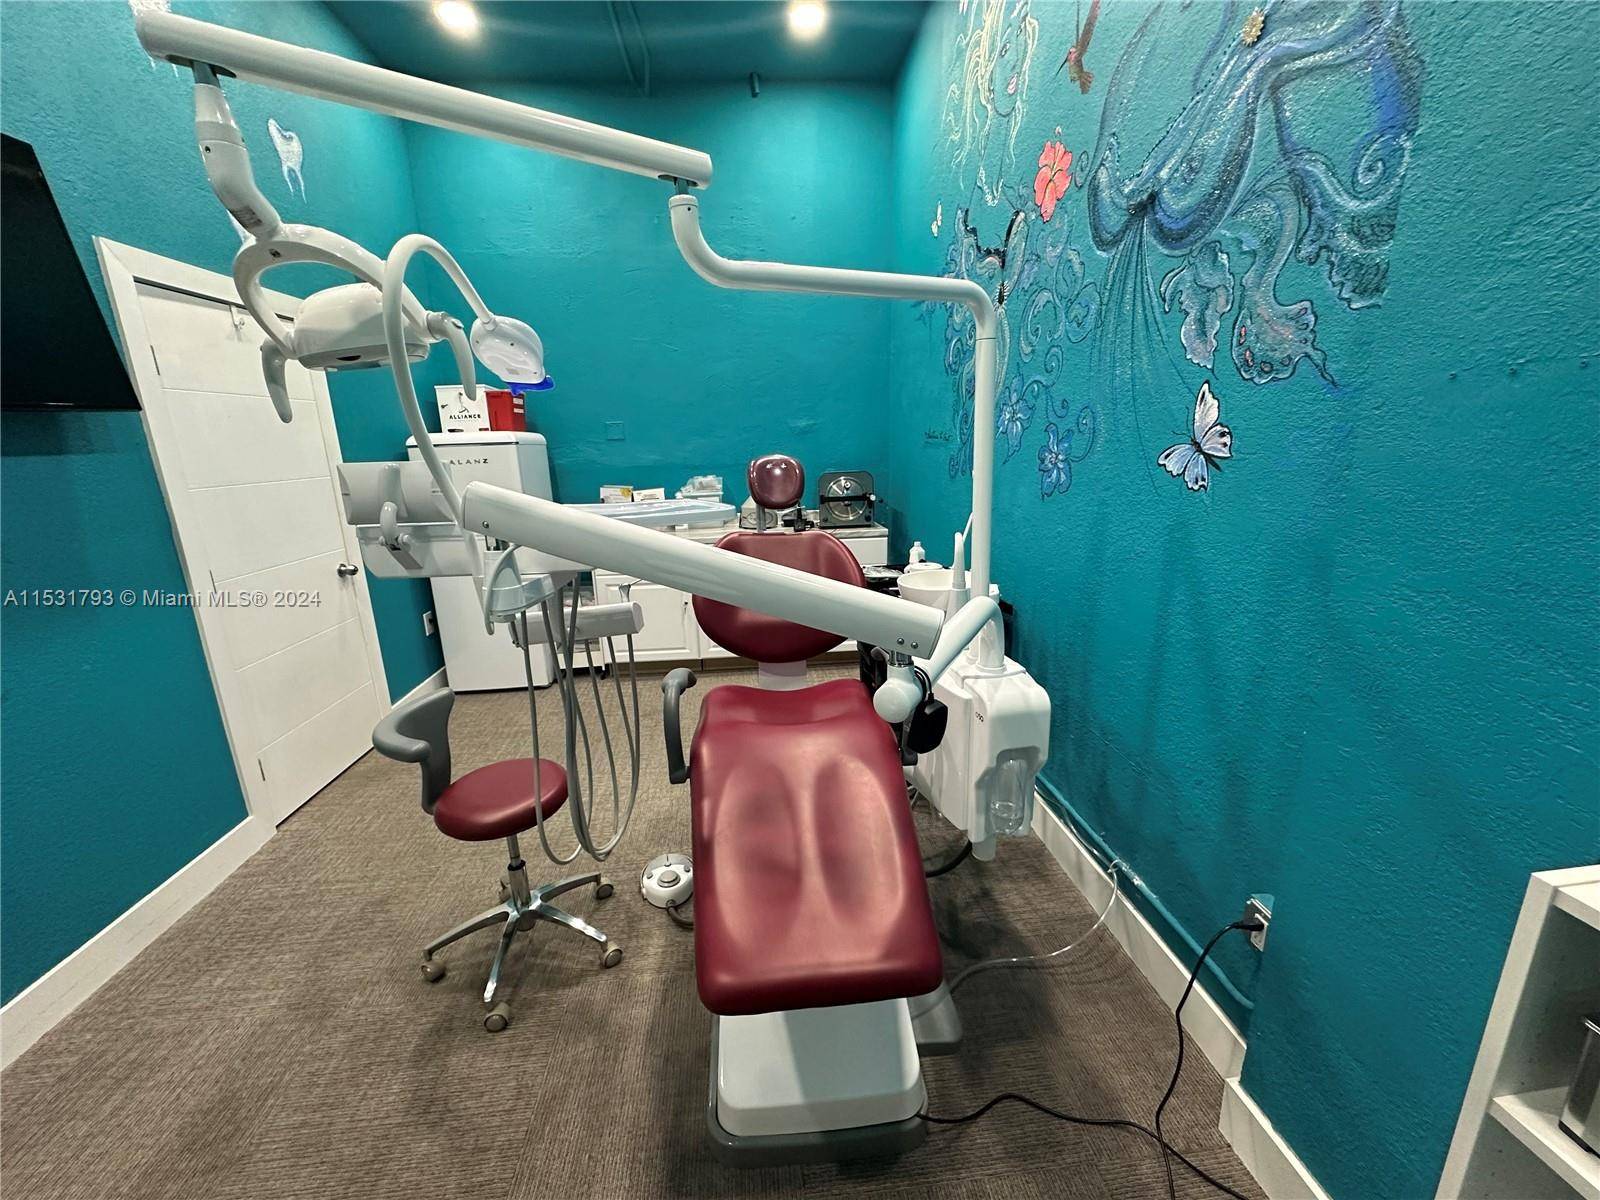 Welcome to our fully equipped dentistry room at Eeefy Med Spa, meticulously designed to meet the needs of dental professionals seeking a turnkey solution.